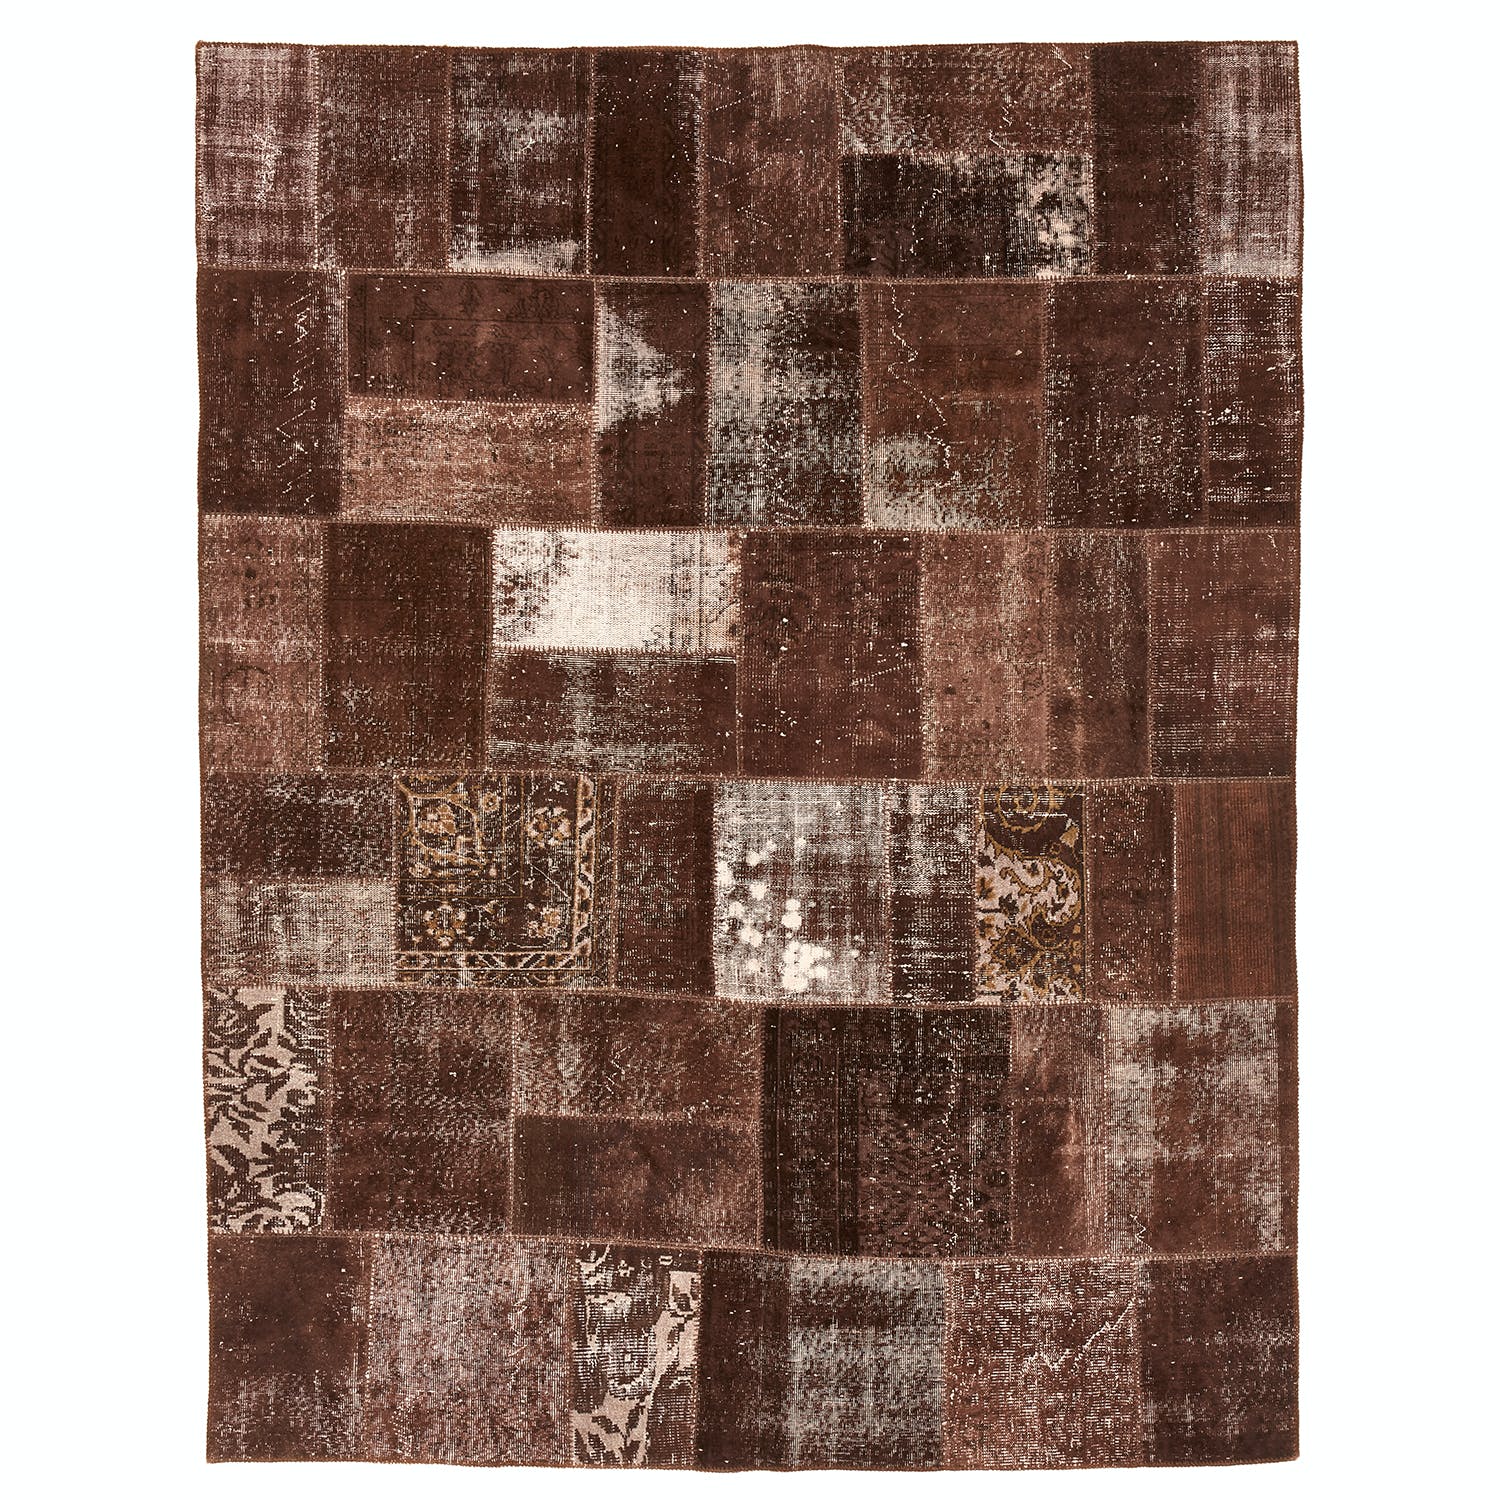 Abstract patchwork rug with rustic charm and contemporary motifs.